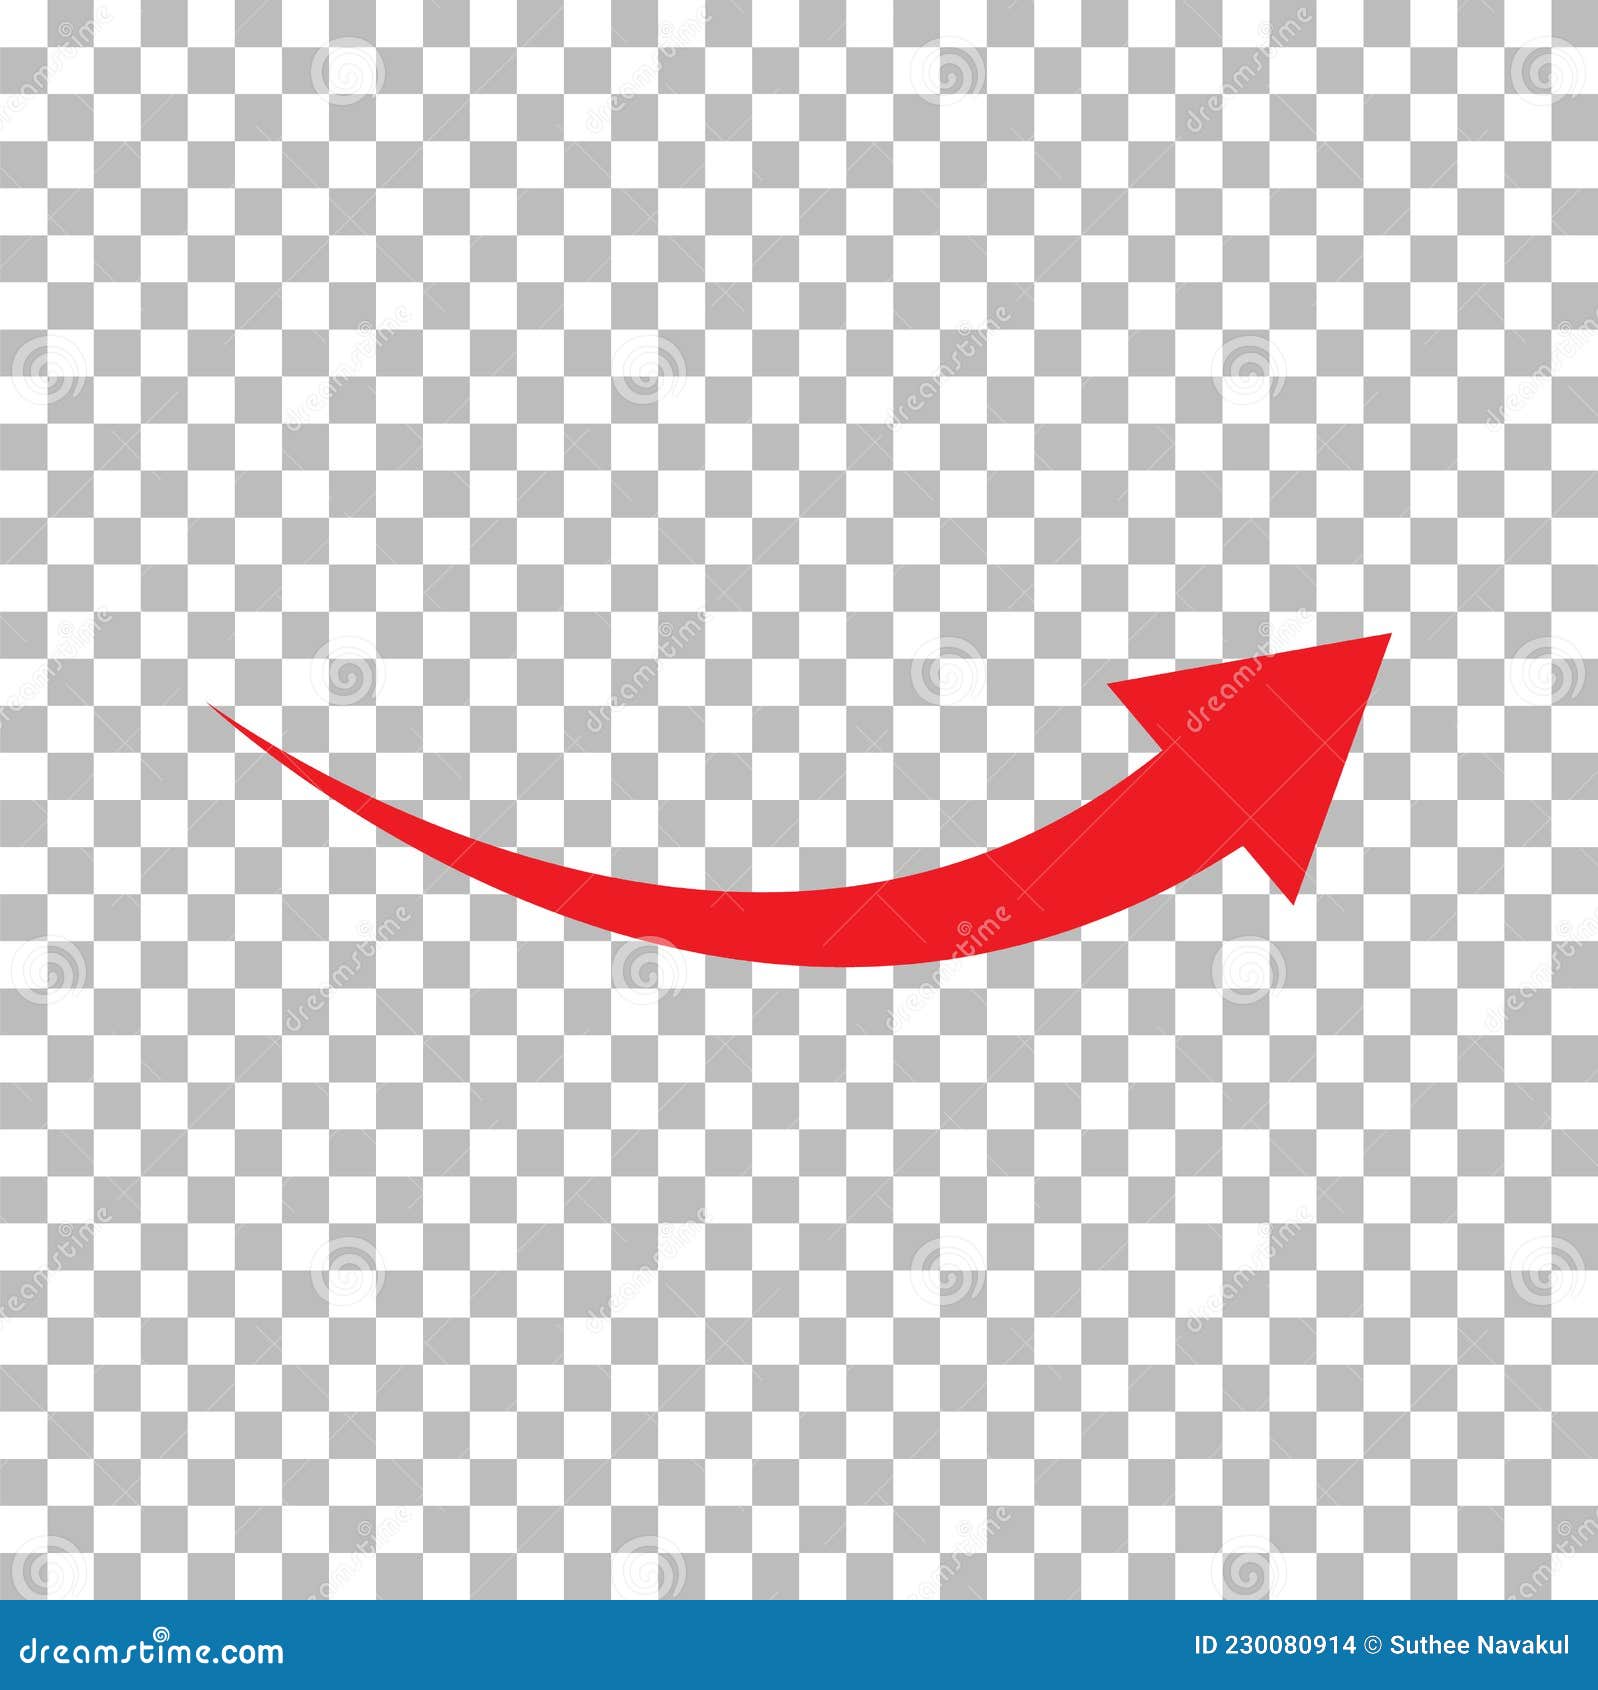 Transparent Transparent Background Red Arrow PNG Images for Your Designs